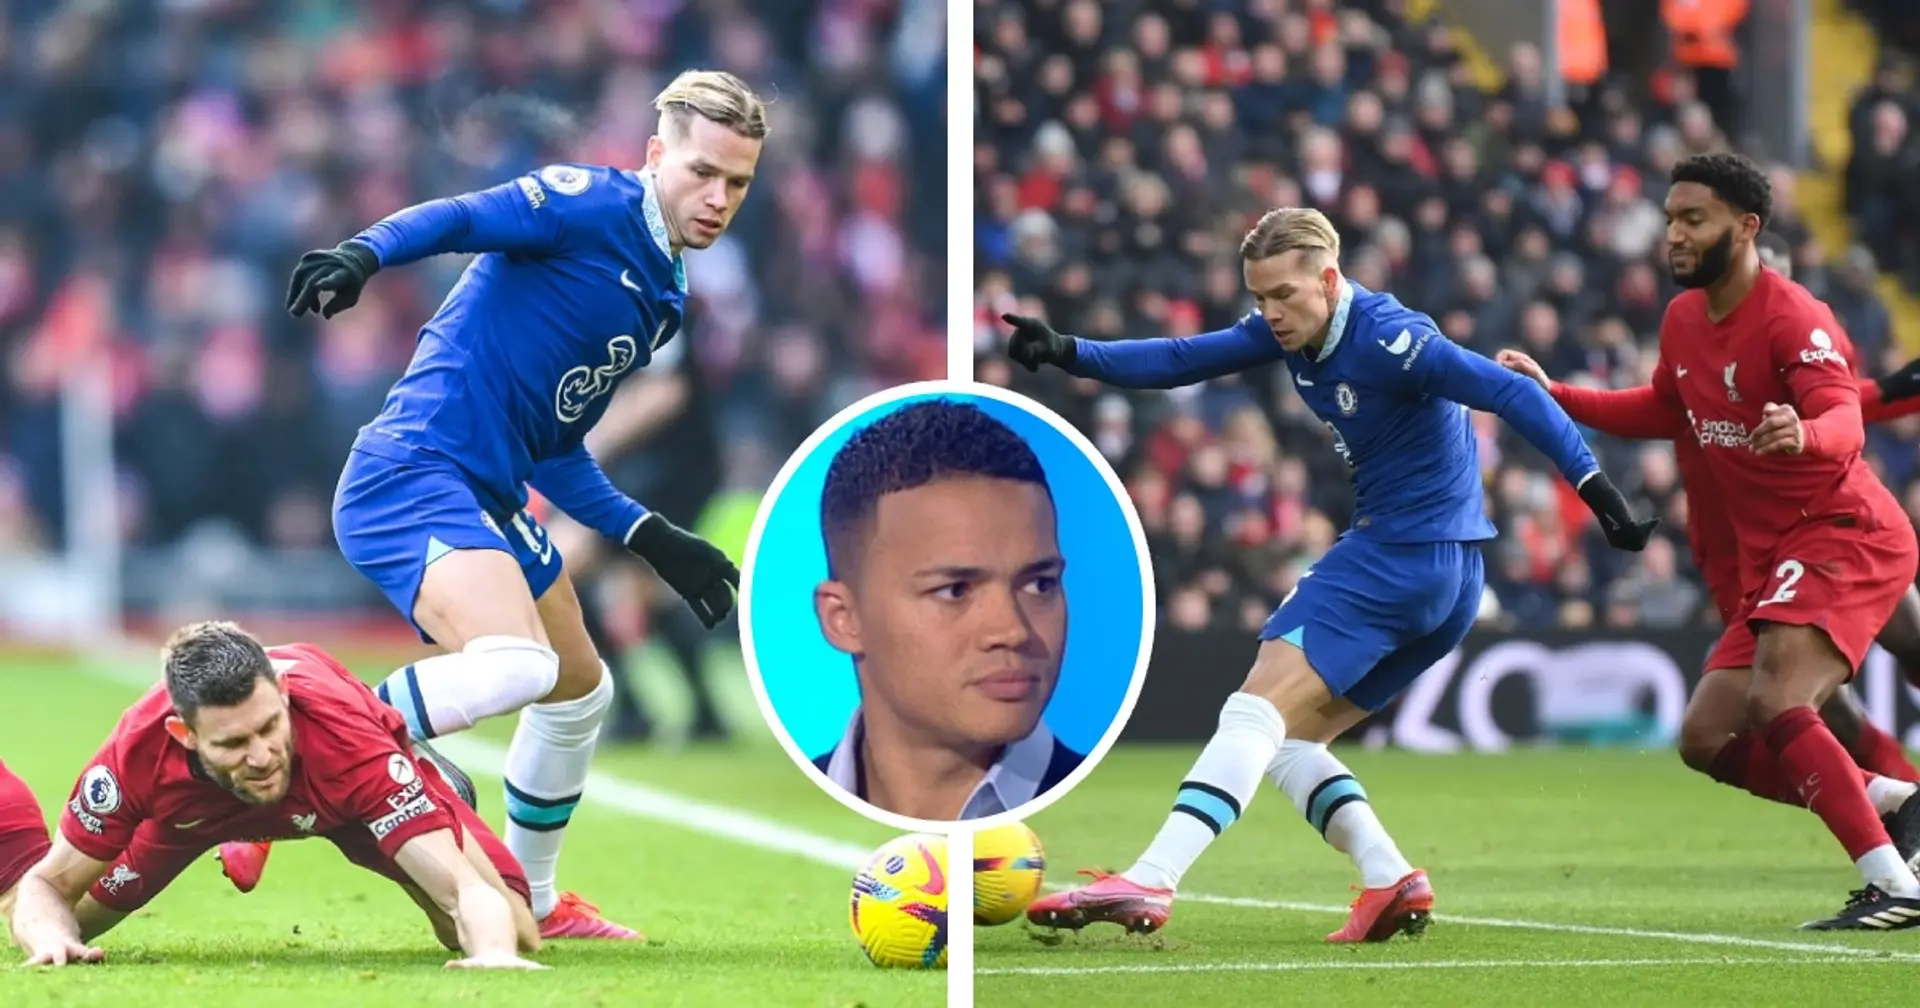 Ex-Spurs man Jenas says Arsenal should've paid up for Mudryk after watching his Chelsea debut